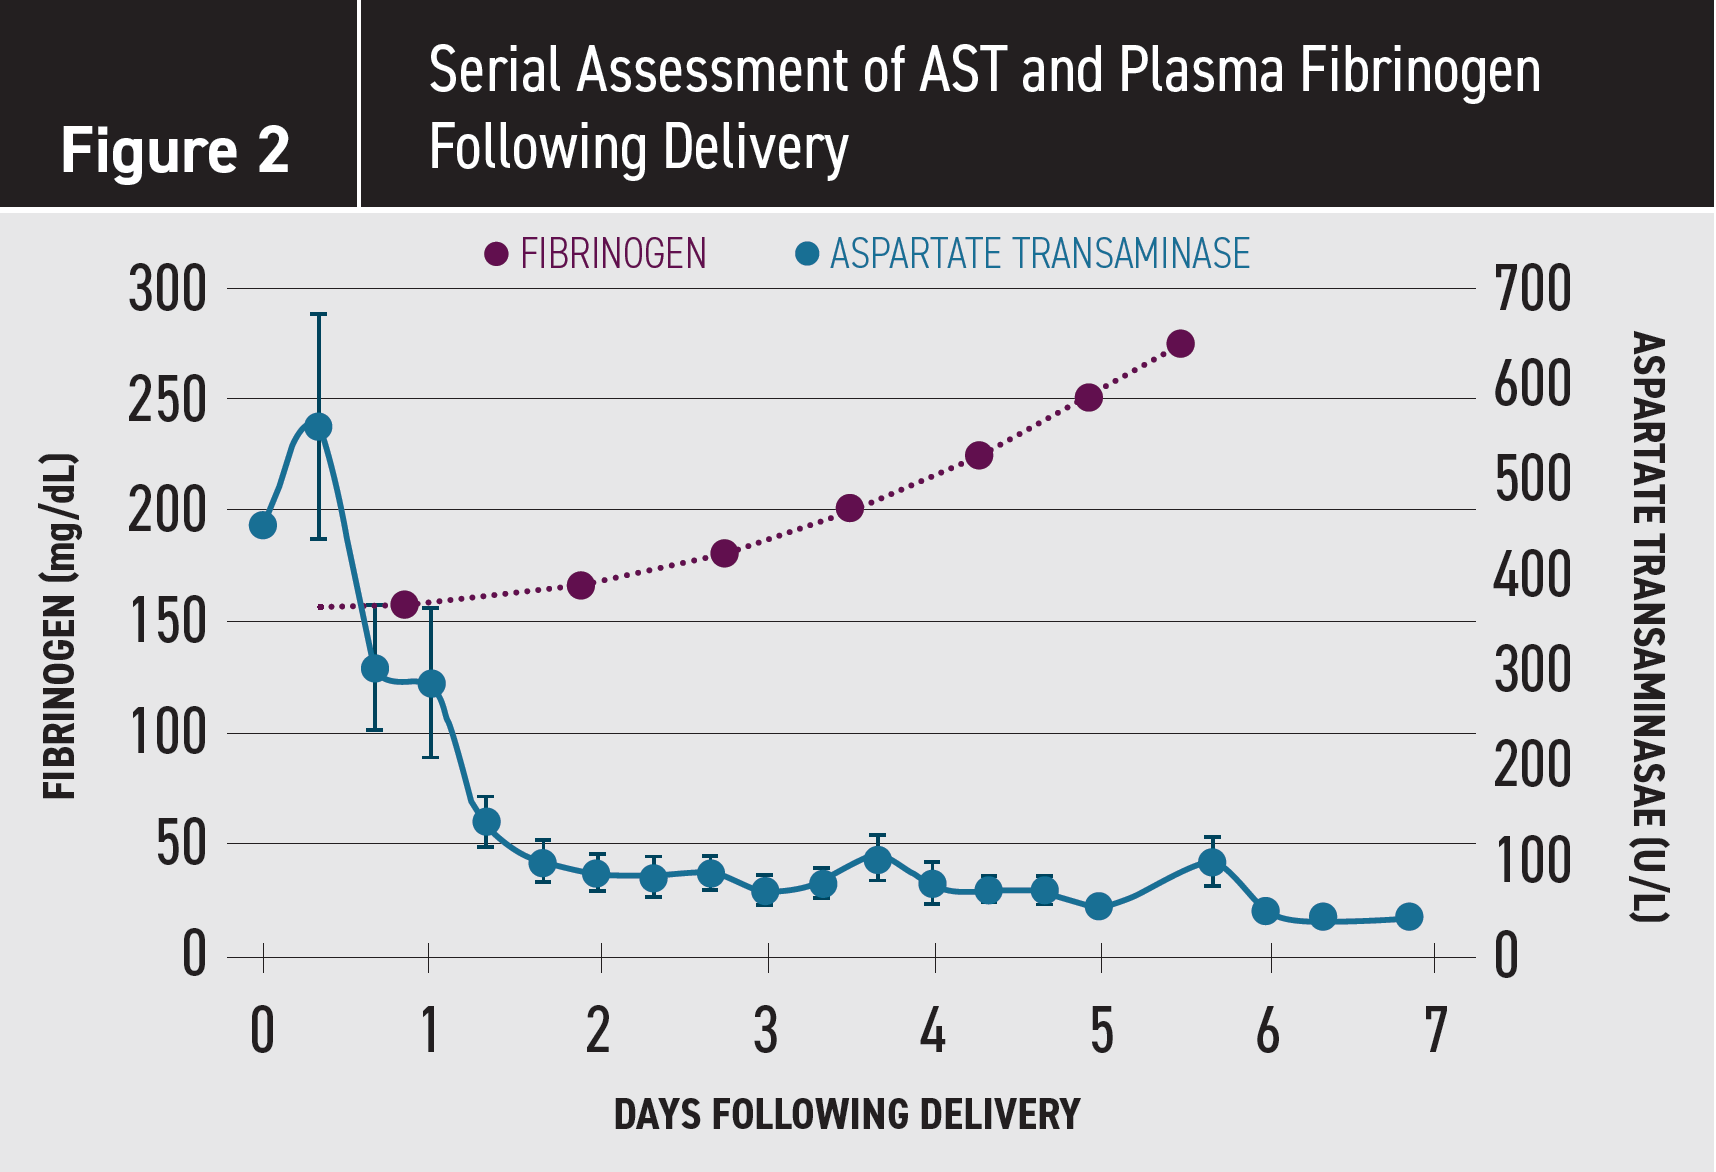 Figure 2. Serial Assessment of AST and Plasma Fibrinogen Following Delivery